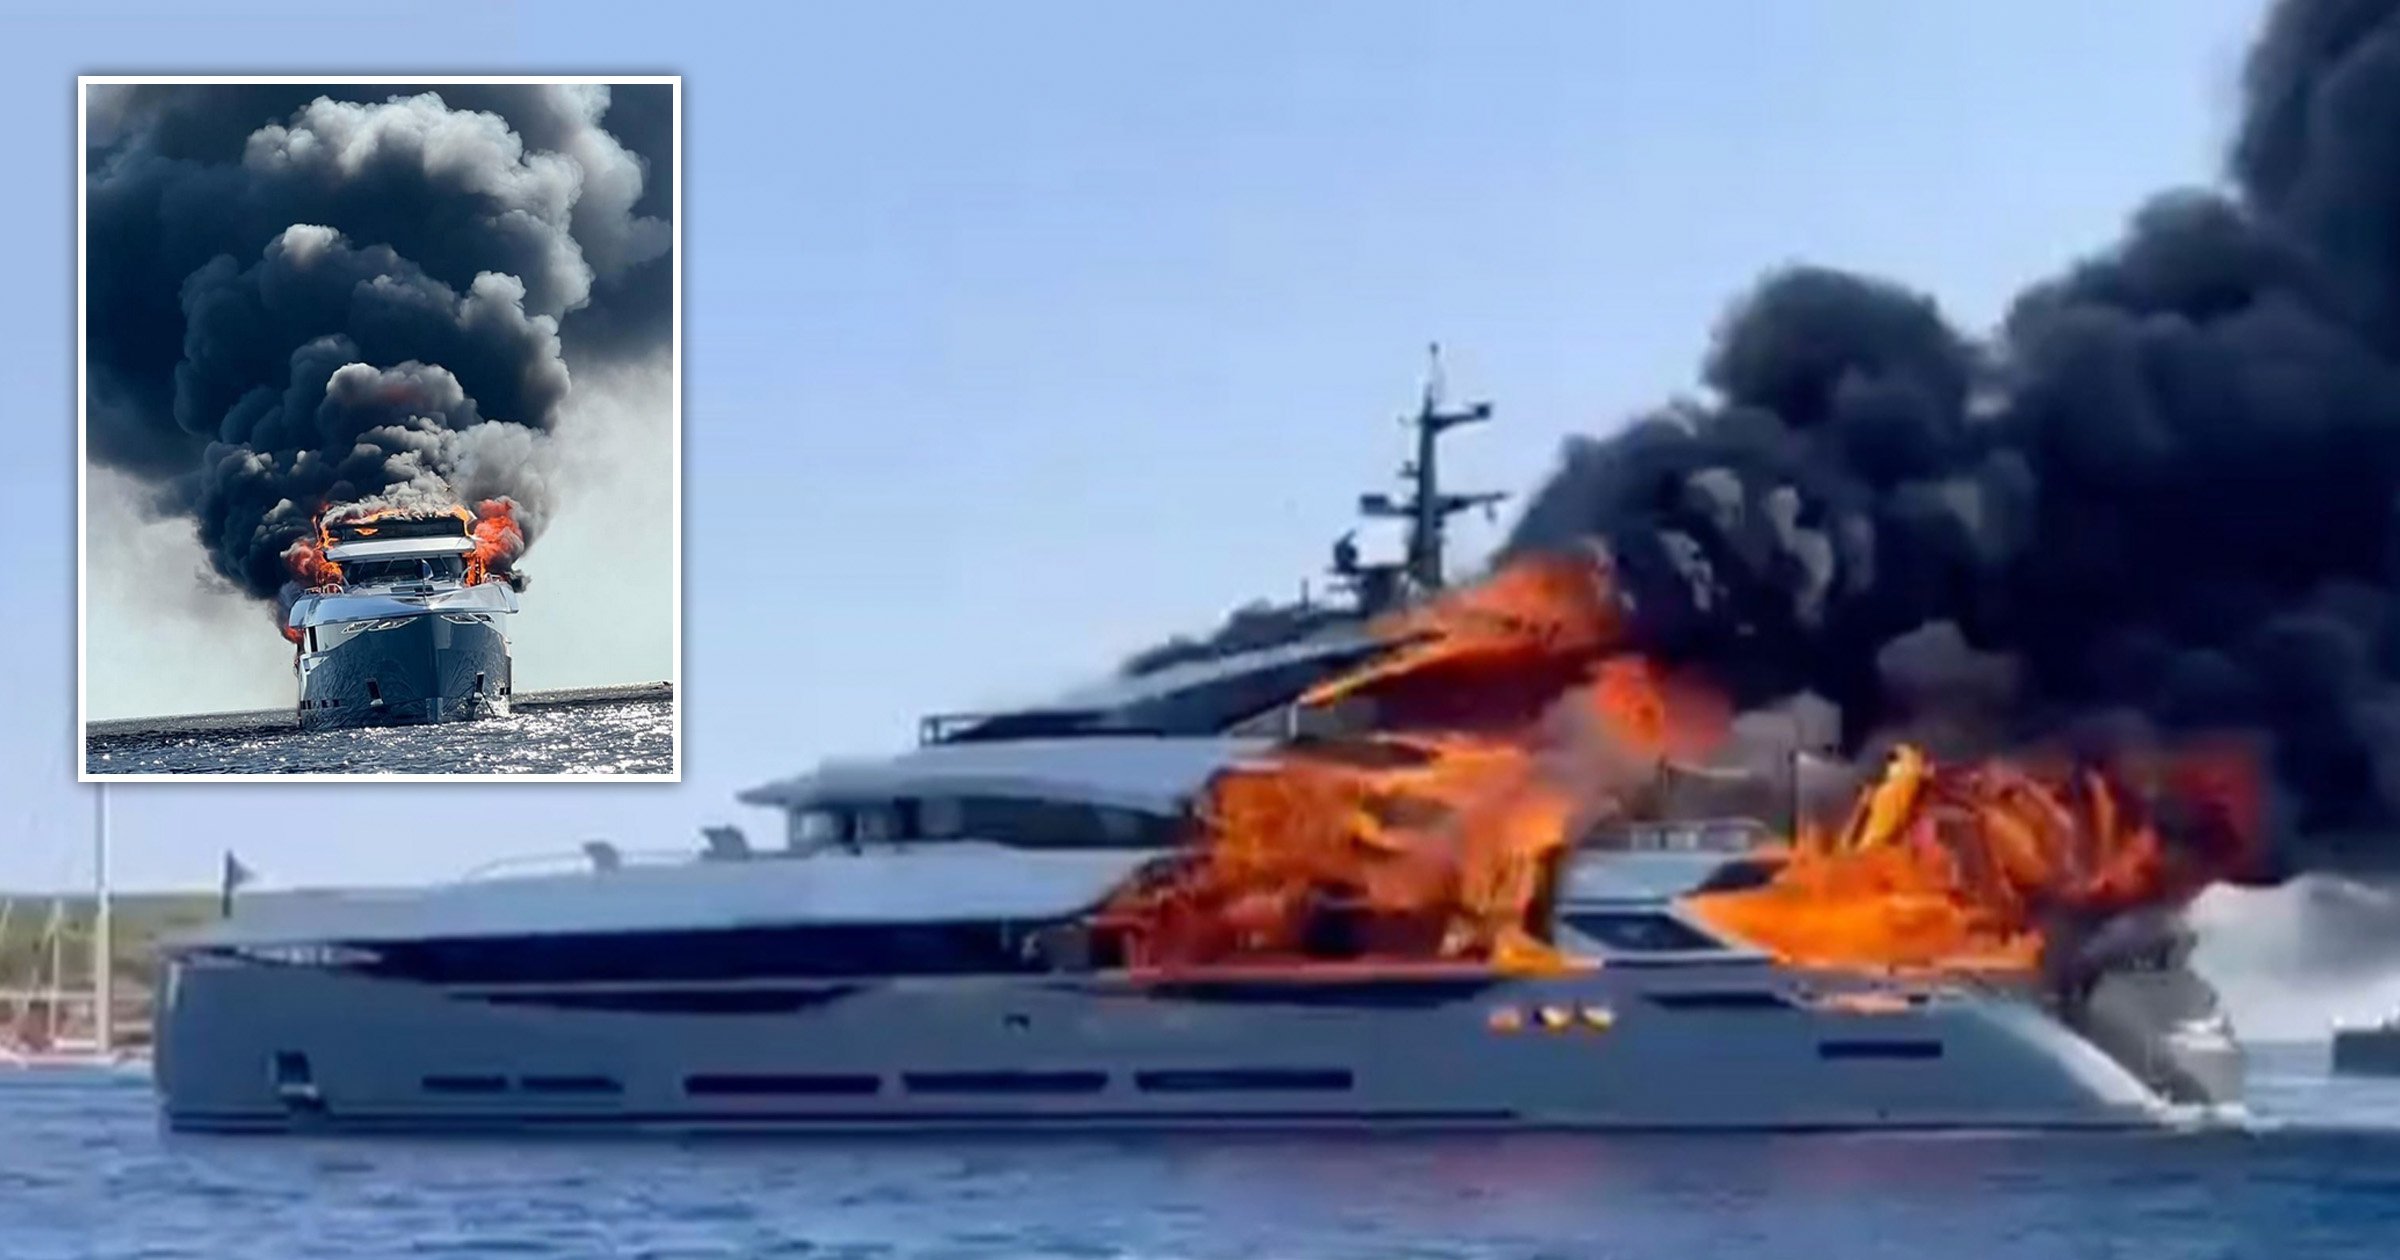 Superyacht worth £20,000,000 goes up in flames a month after being delivered